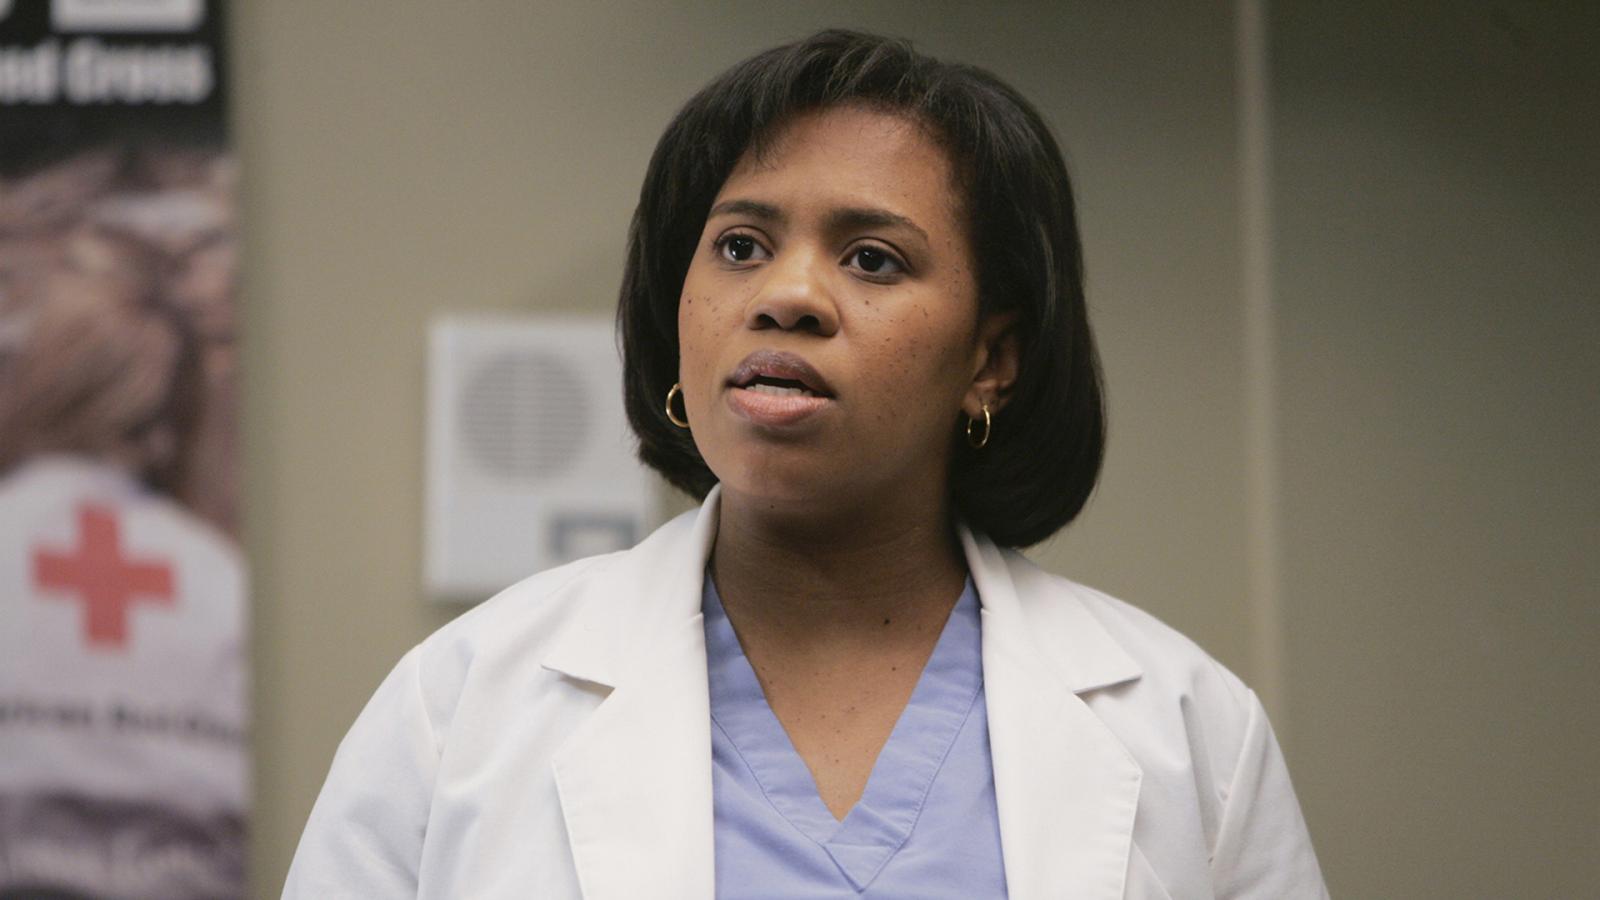 Which Grey's Anatomy Doctor Are You, Based on Your Zodiac Sign? - image 2